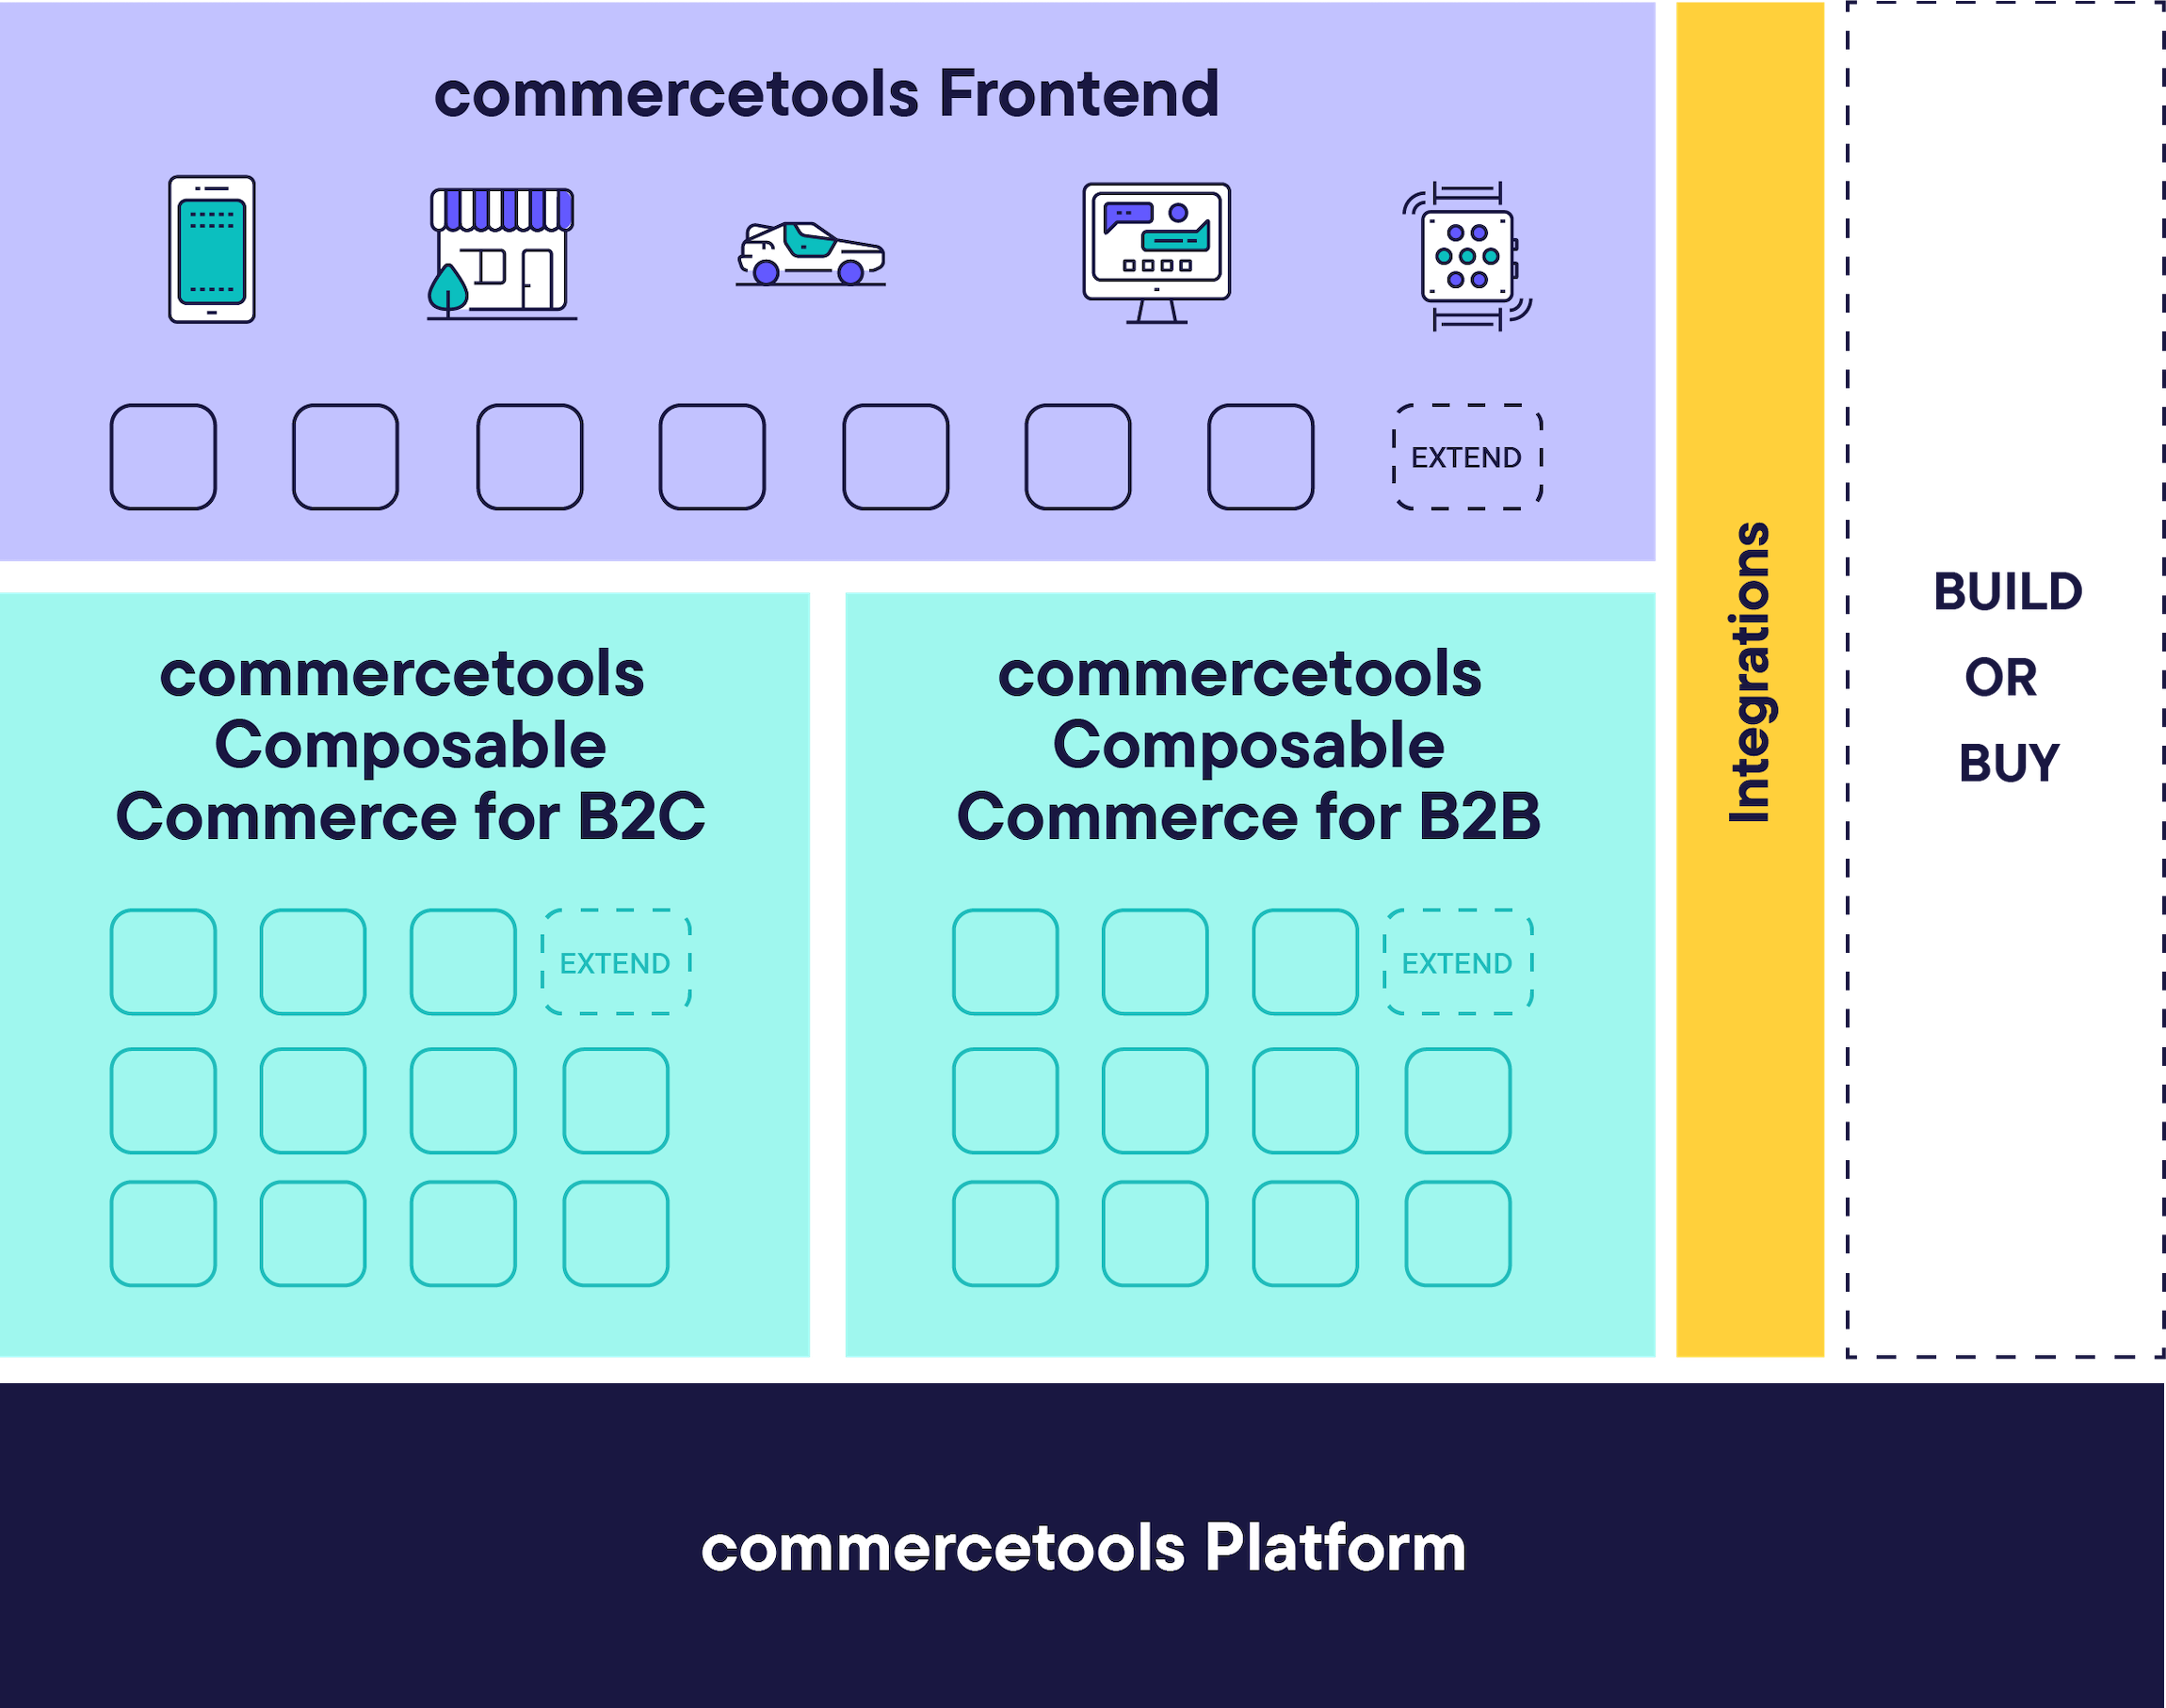 The composable commerce approach by commercetools